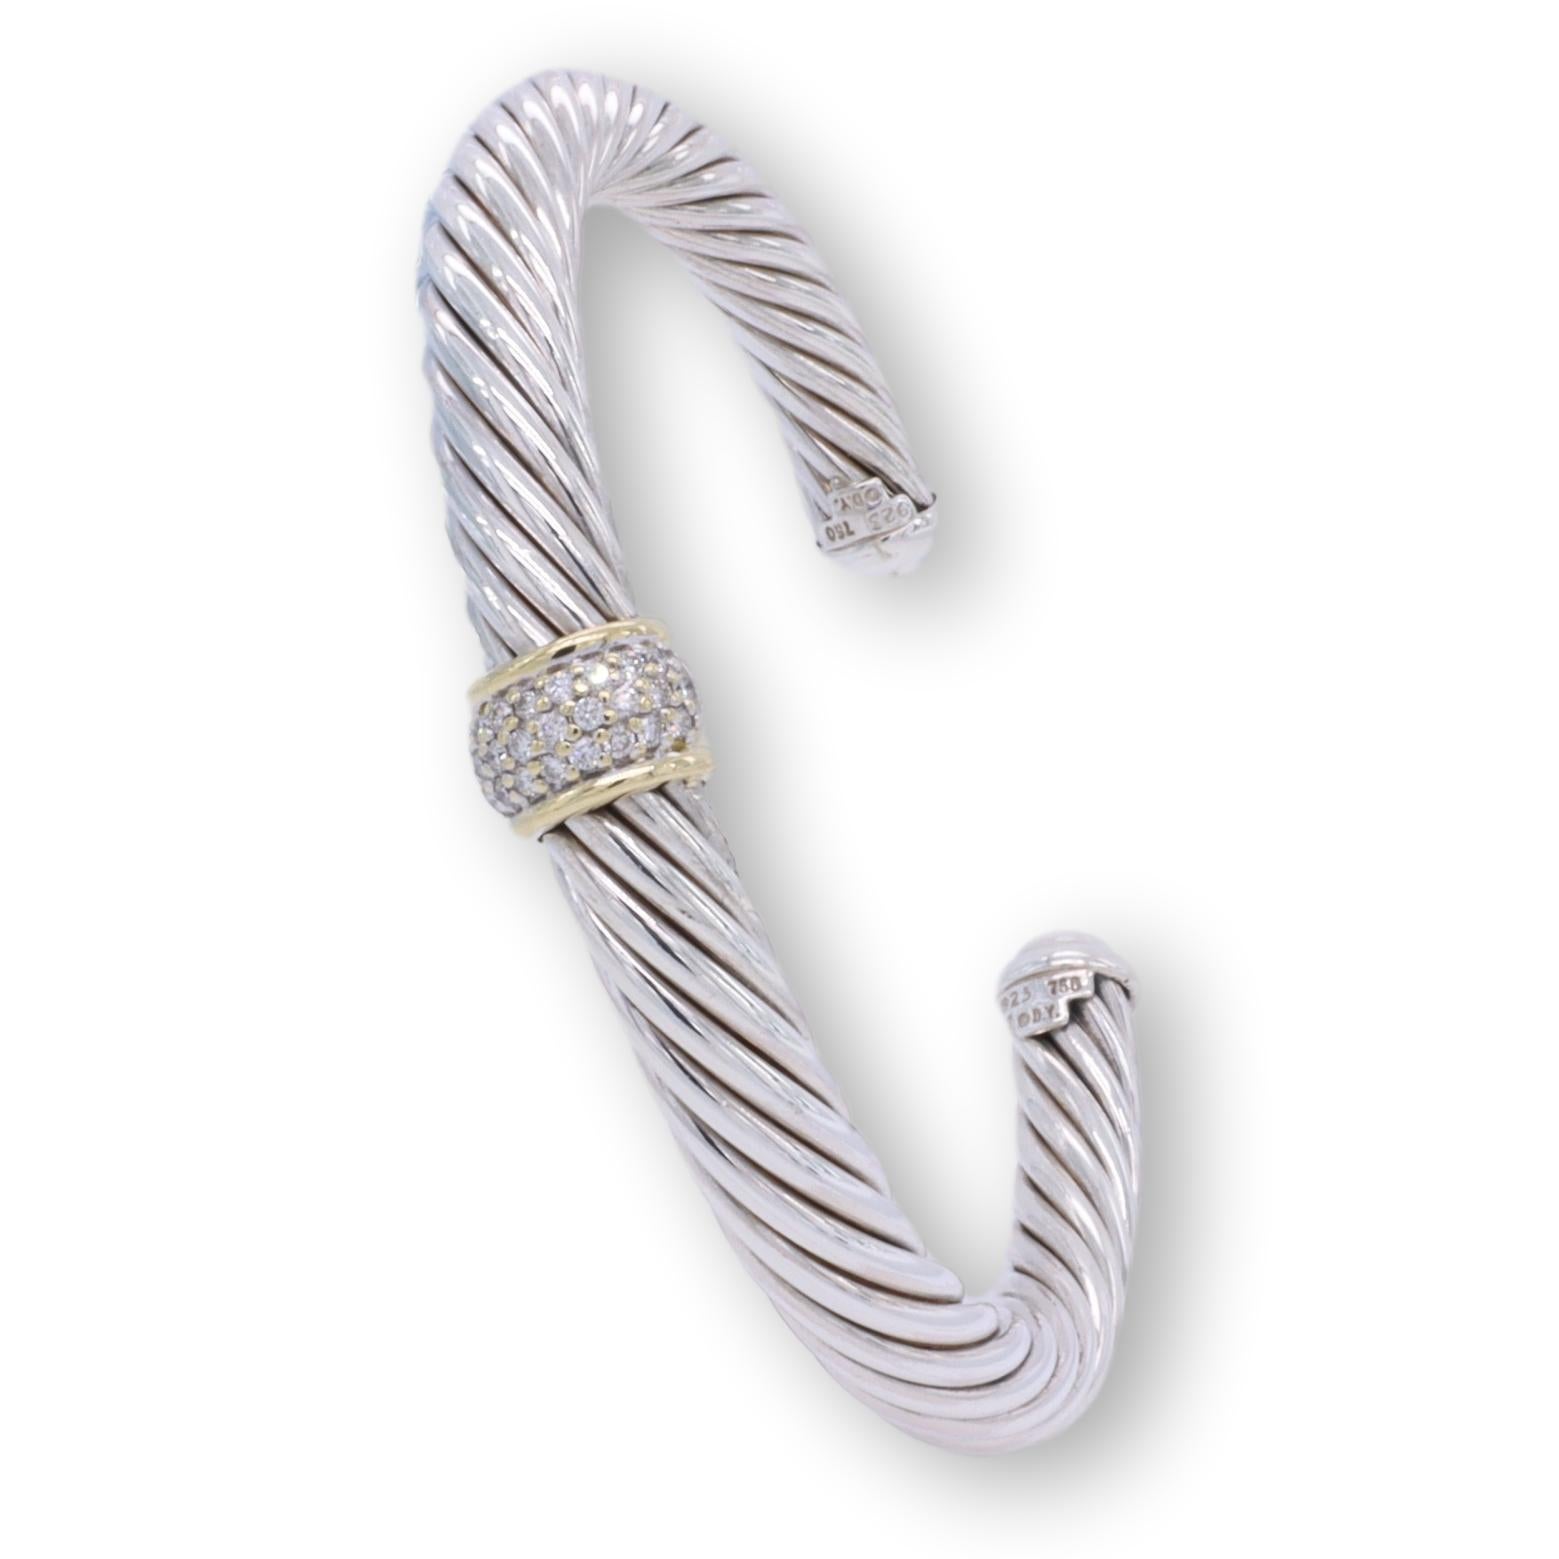 David Yurman Slip on two tone open cuff bangle bracelet from the cable classics collection finely crafted in sterling silver featuring a station of pave set round brilliant cut diamonds 0.21 cts total weight approximately inside 2 strip details